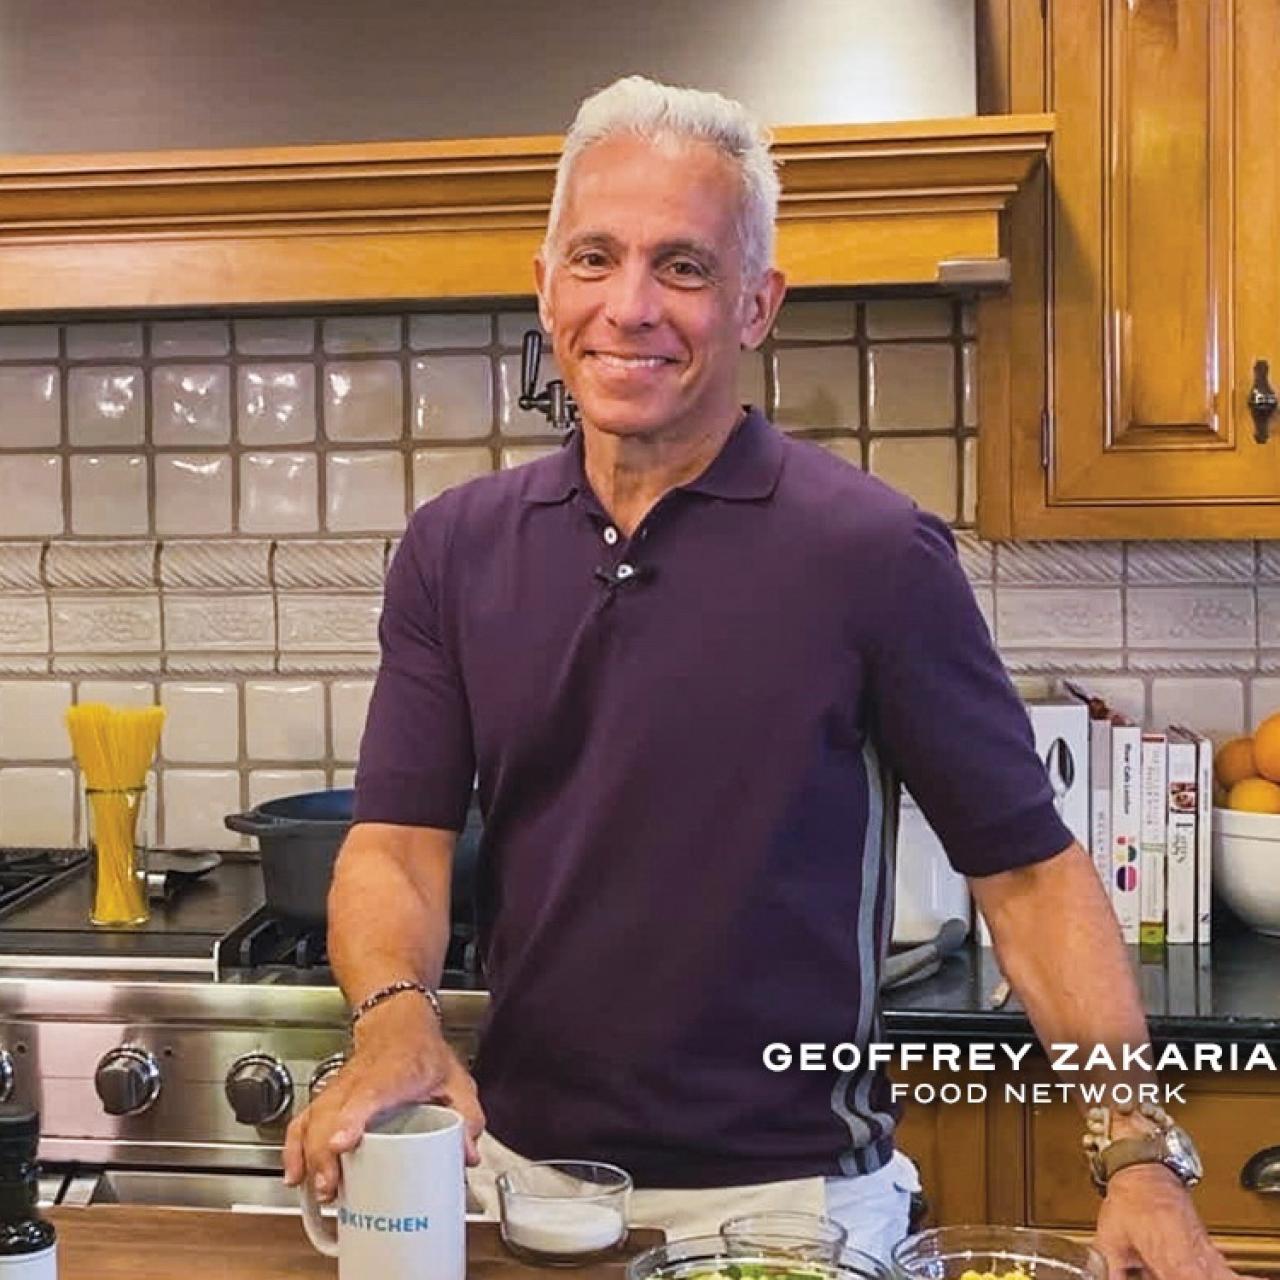 Make Family-Friendly Food With Geoffrey Zakarian and QVC, FN Dish -  Behind-the-Scenes, Food Trends, and Best Recipes : Food Network